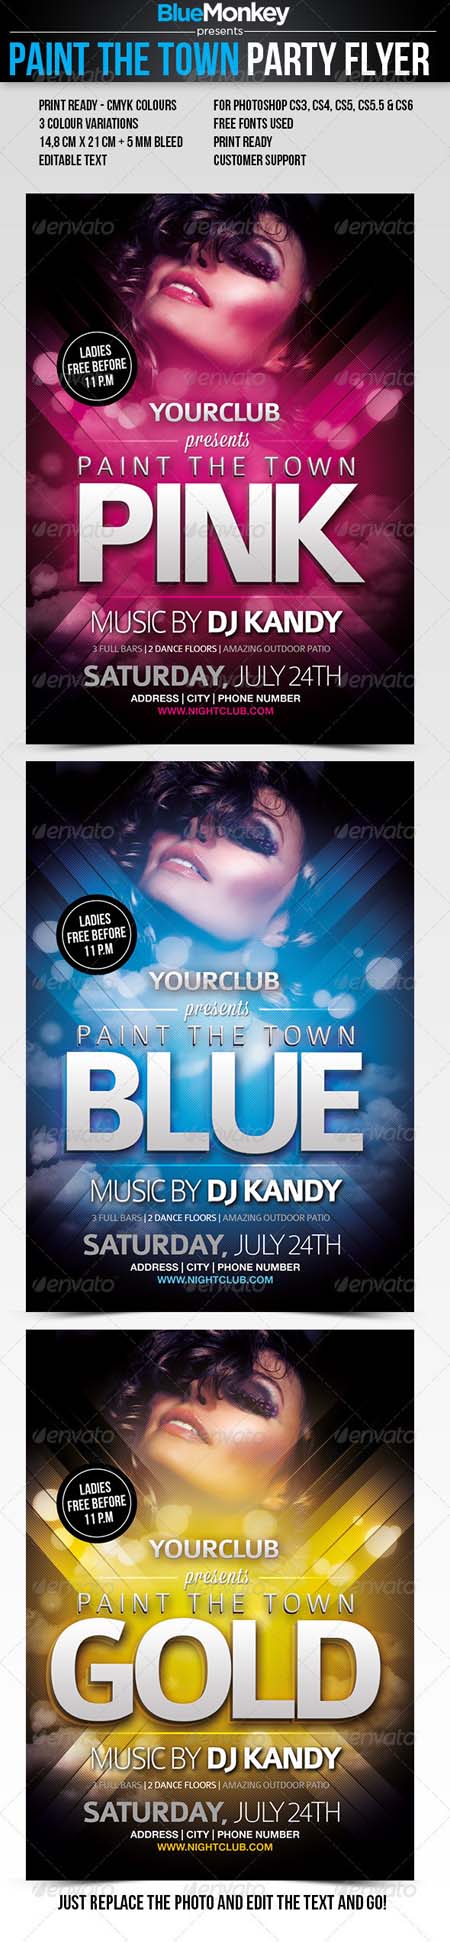 GraphicRiver Paint The Town Party Flyer Template